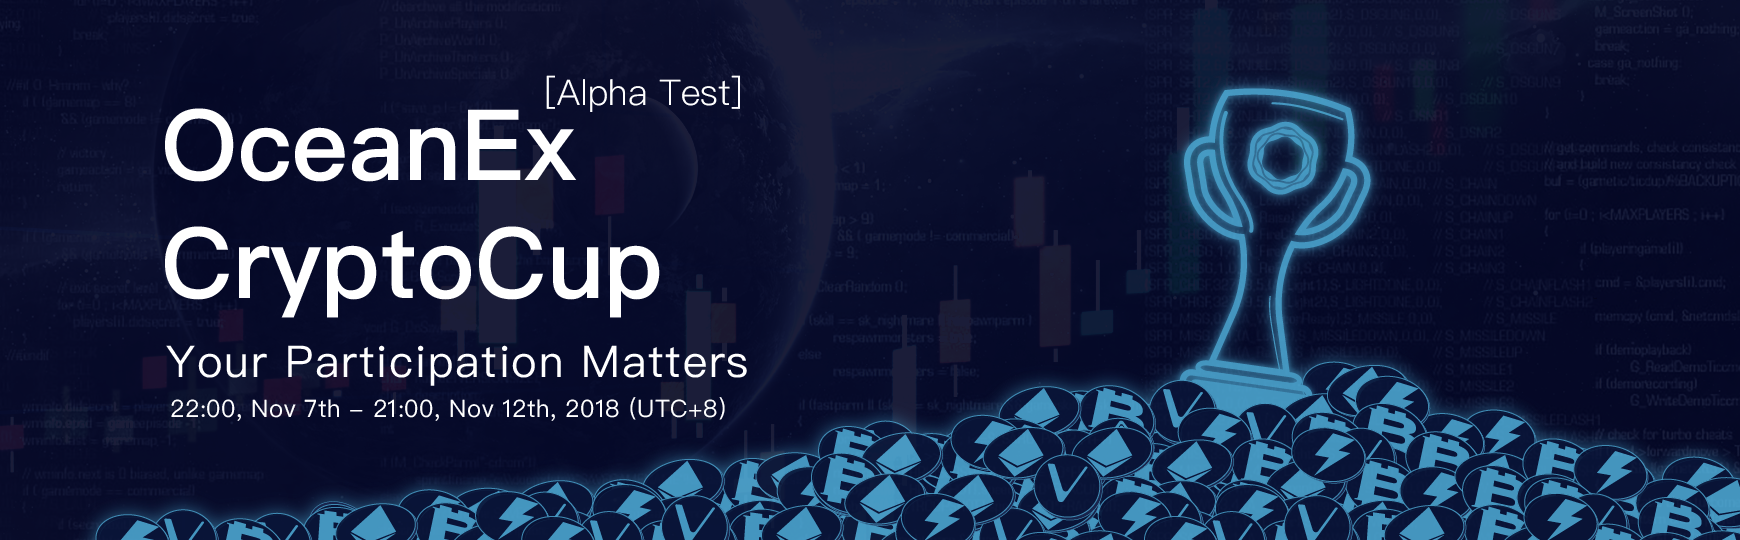 OceanEx CryptoCup [Alpha Test] Compete for 50 Million